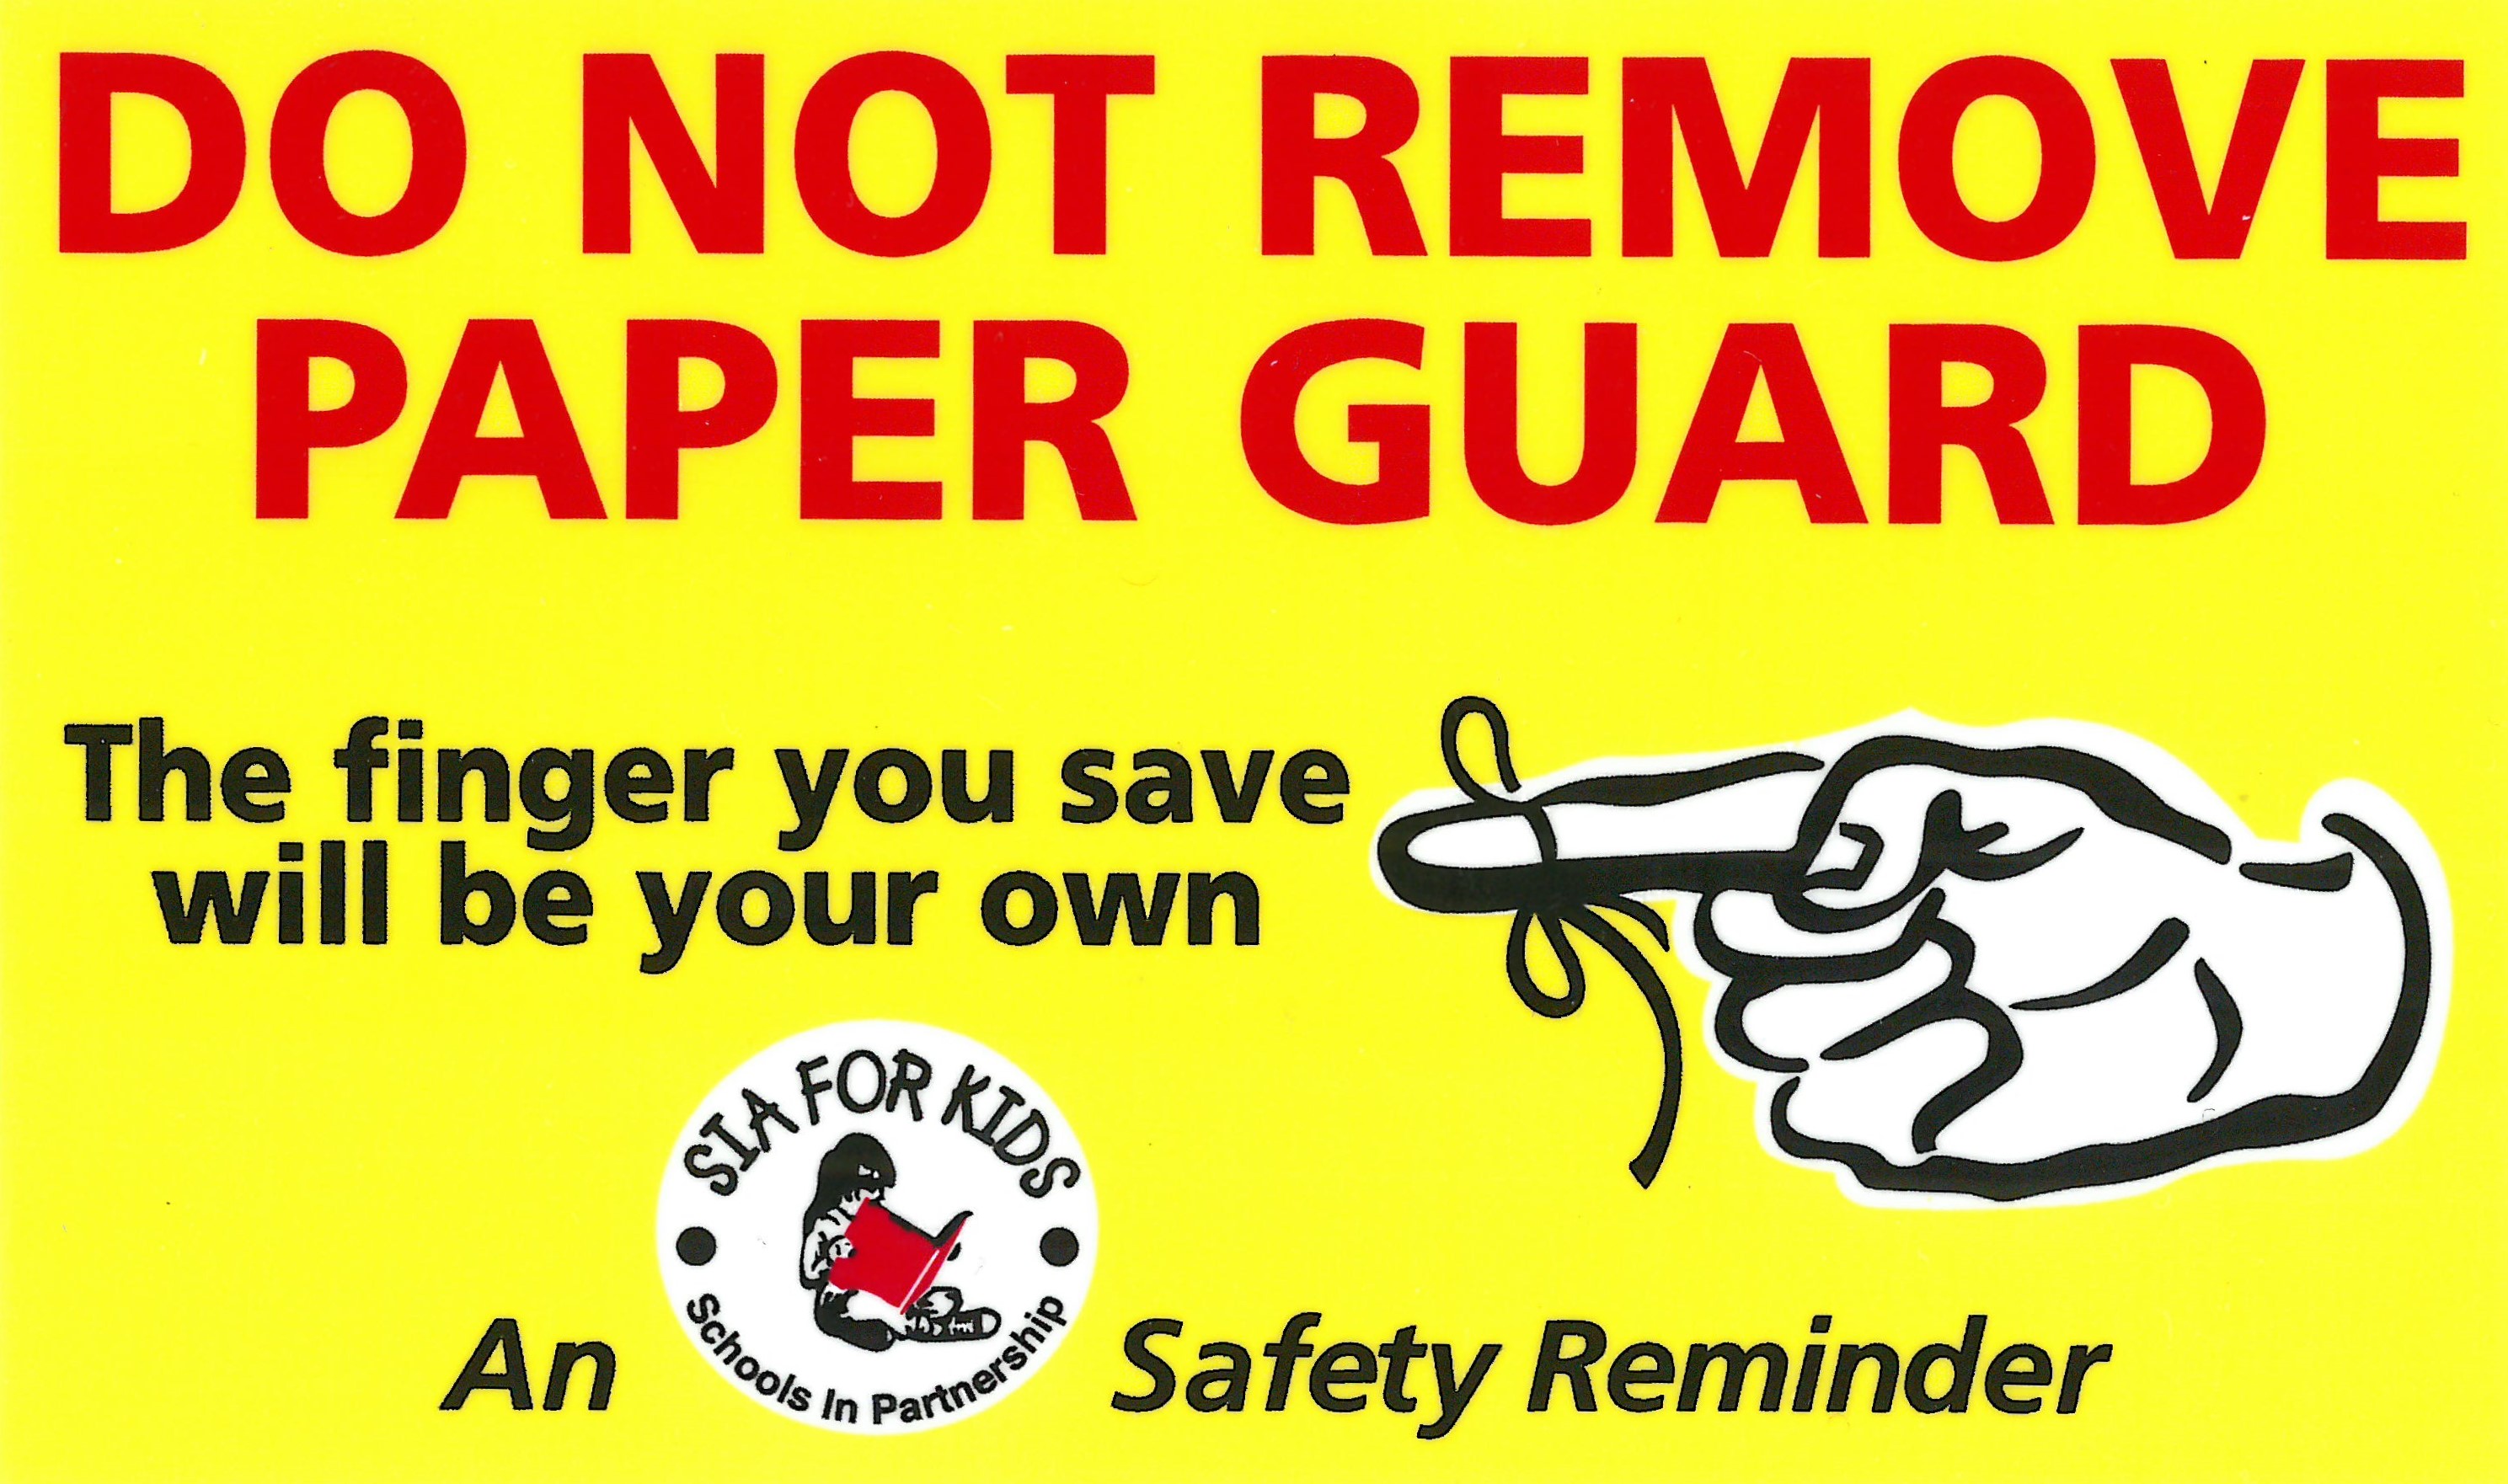 Do Not Remove Paper Guard. The finger you save will be your own. An SIA for Kids Safety Reminder.